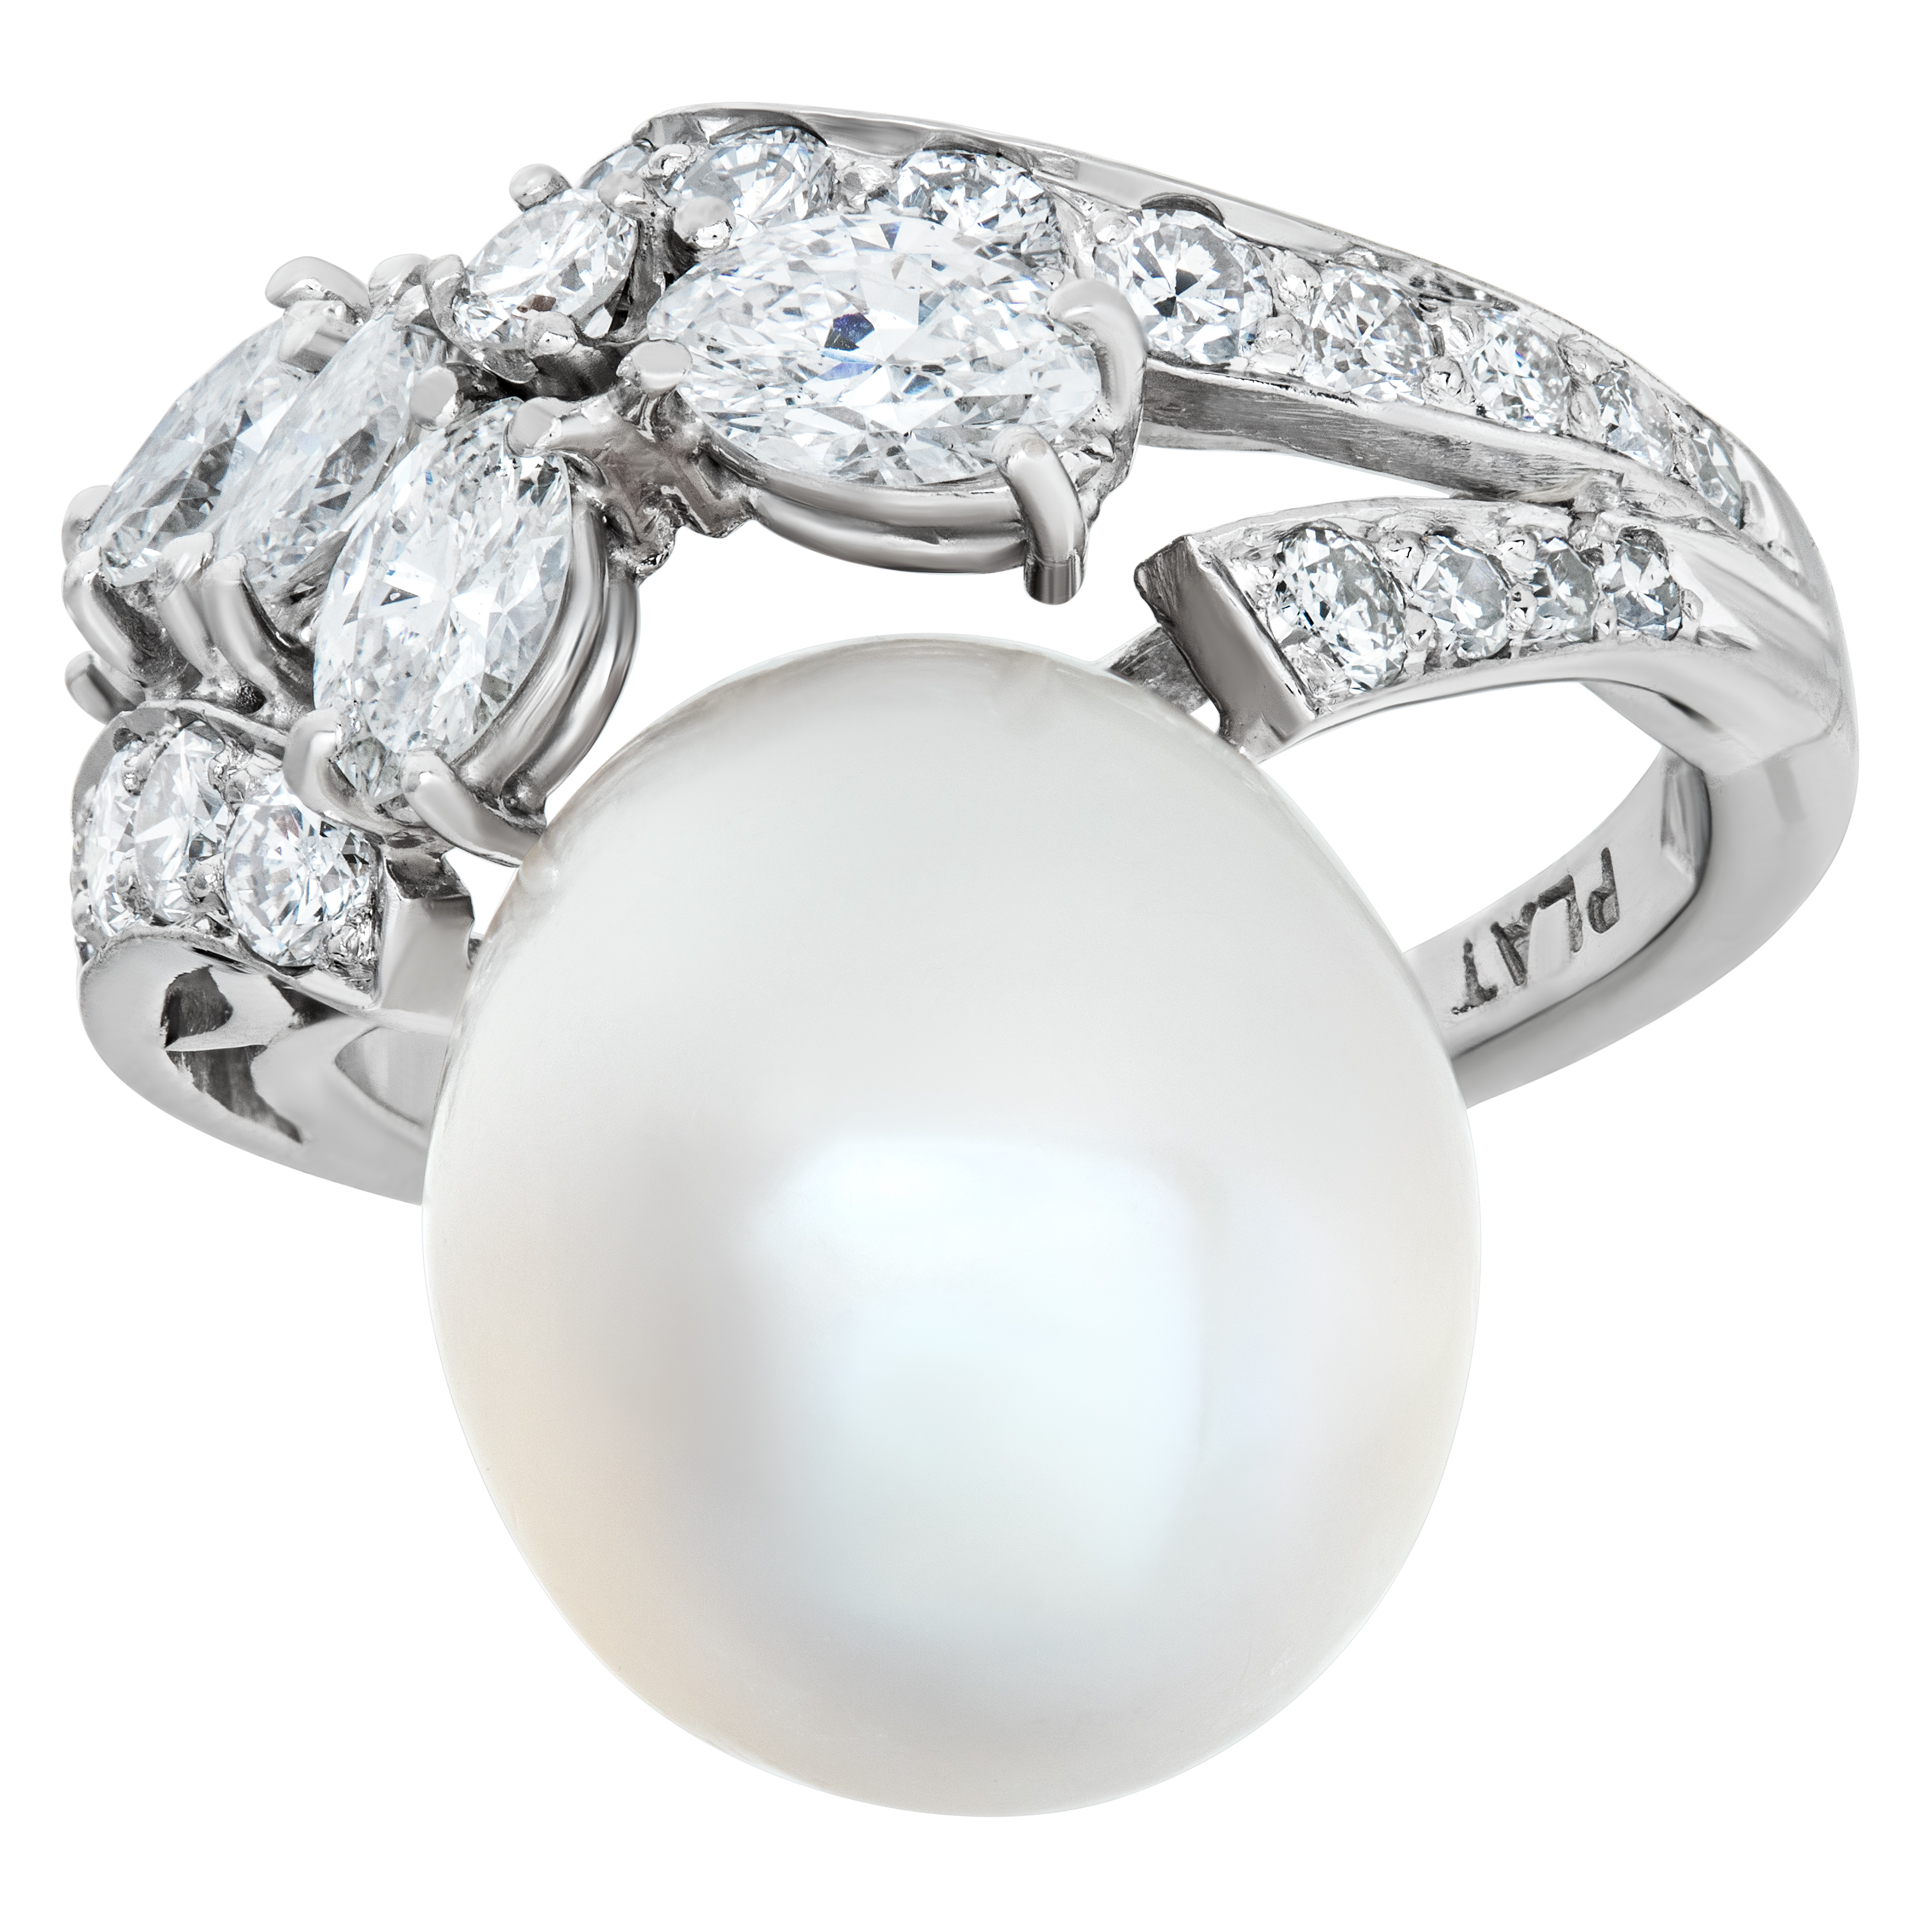 Pearl & diamond ring set in platinum. 1.00cts in diamonds. Size 3.75